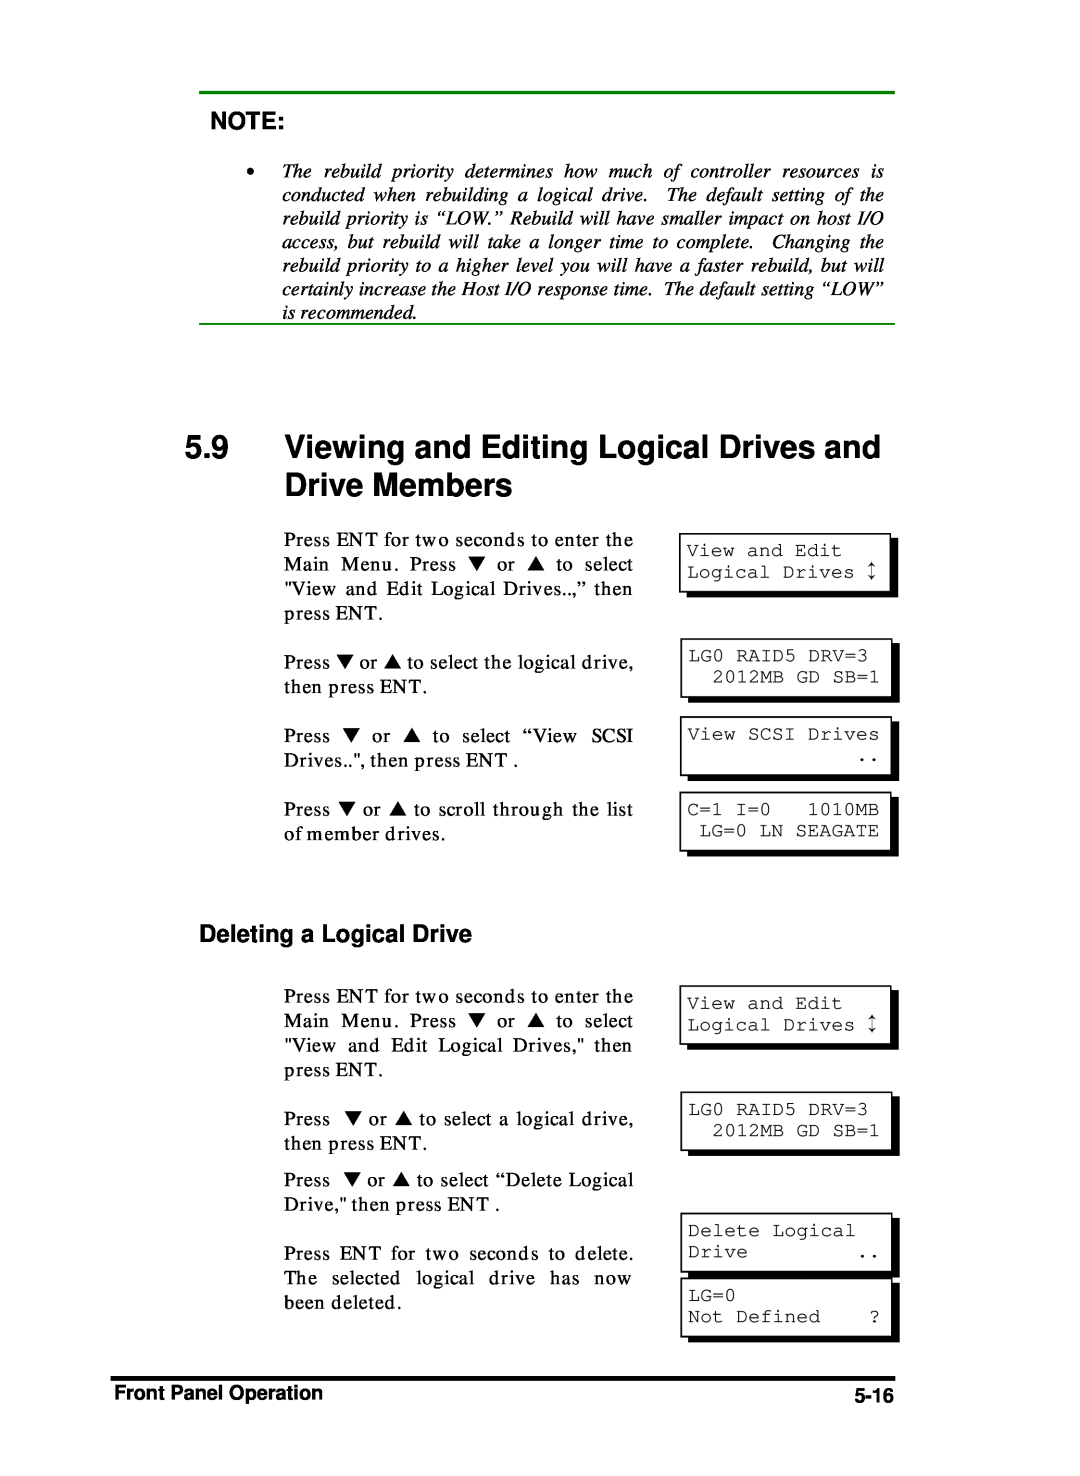 Compaq Infortrend manual Viewing and Editing Logical Drives and Drive Members, Deleting a Logical Drive 